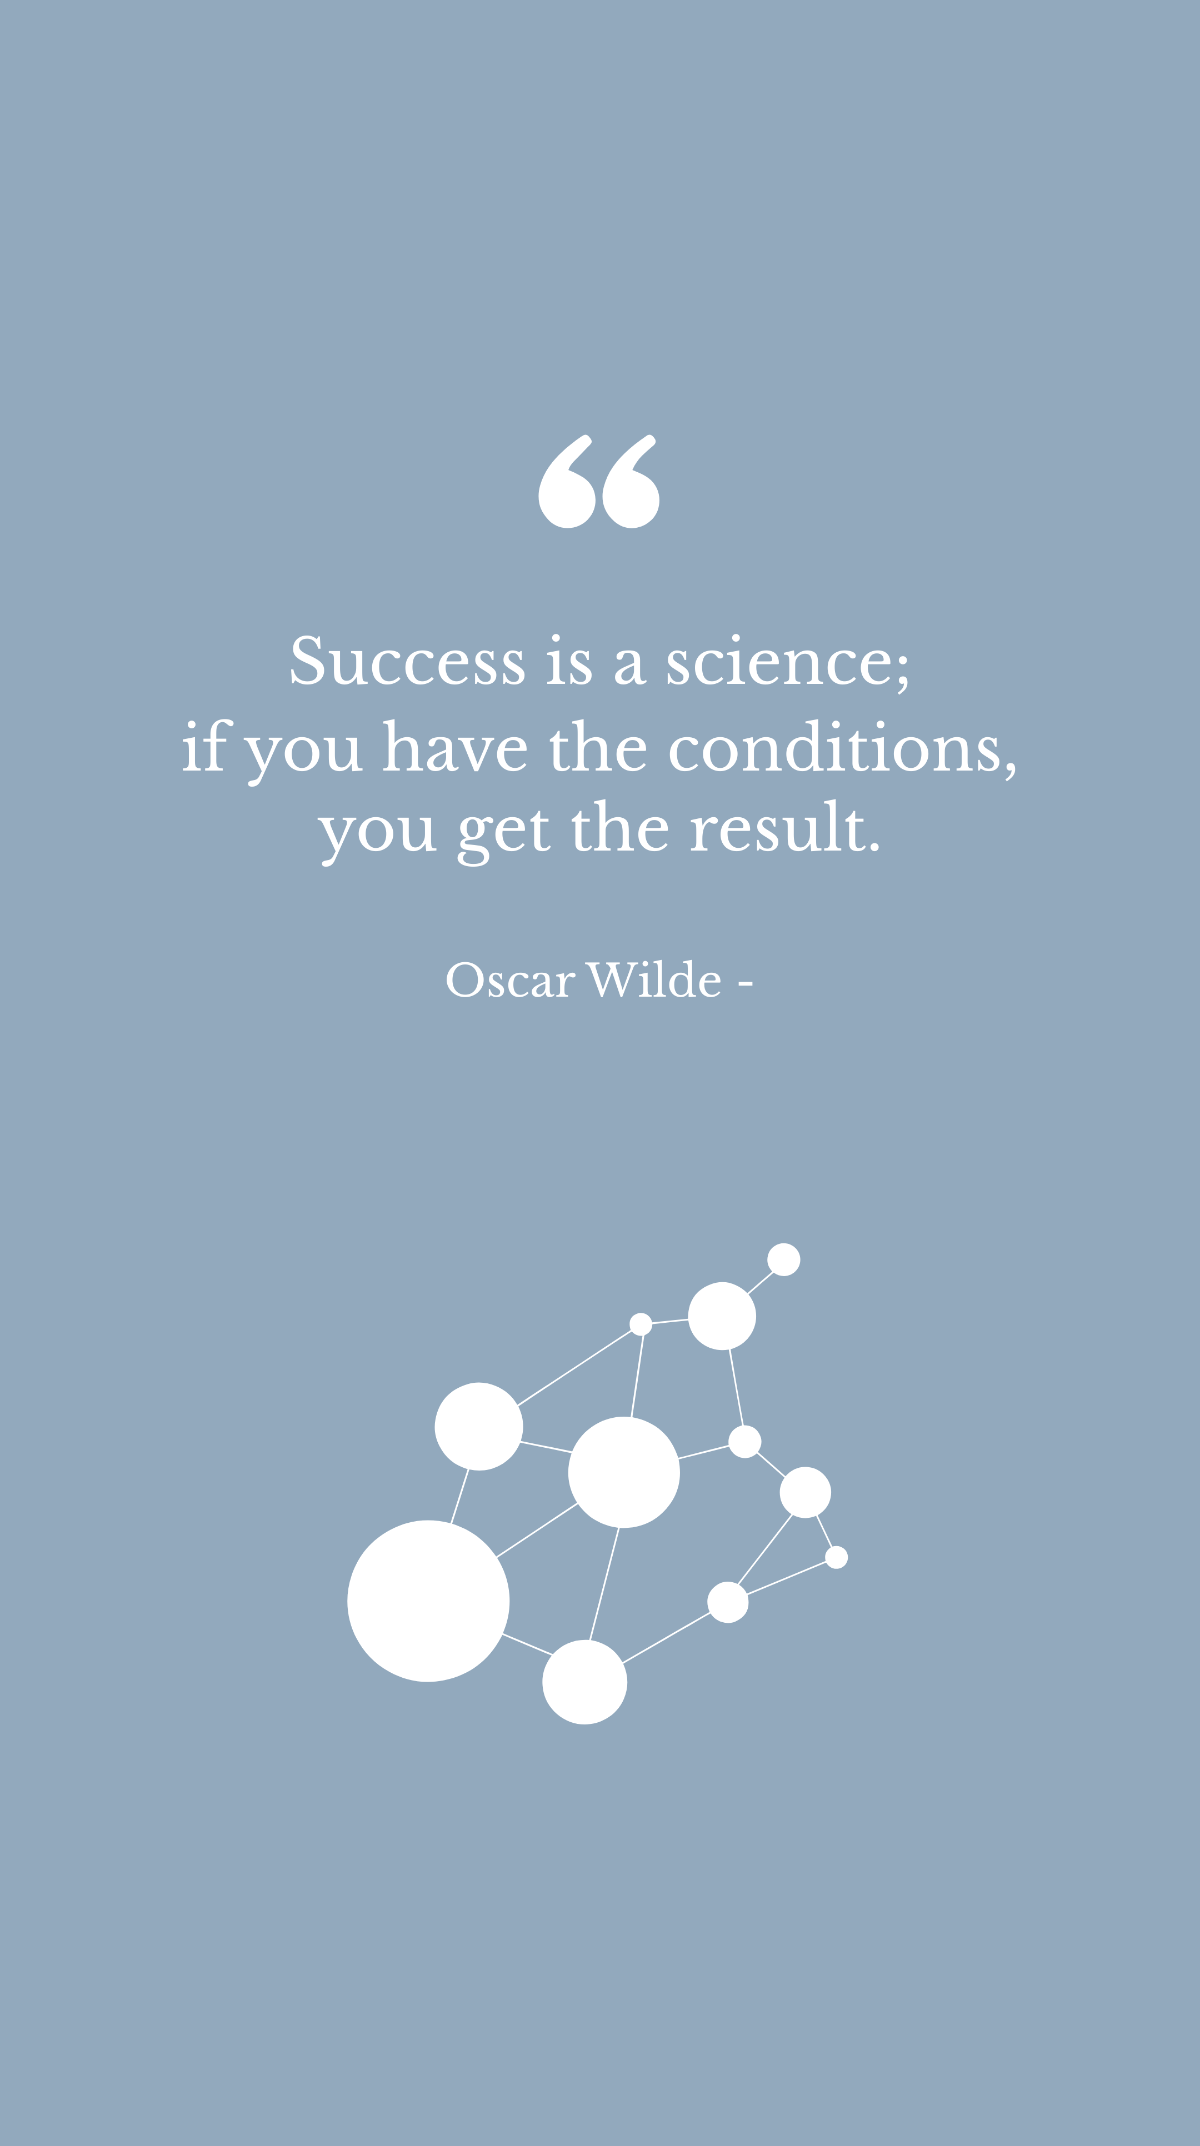 Oscar Wilde - Success is a science; if you have the conditions, you get the result. Template